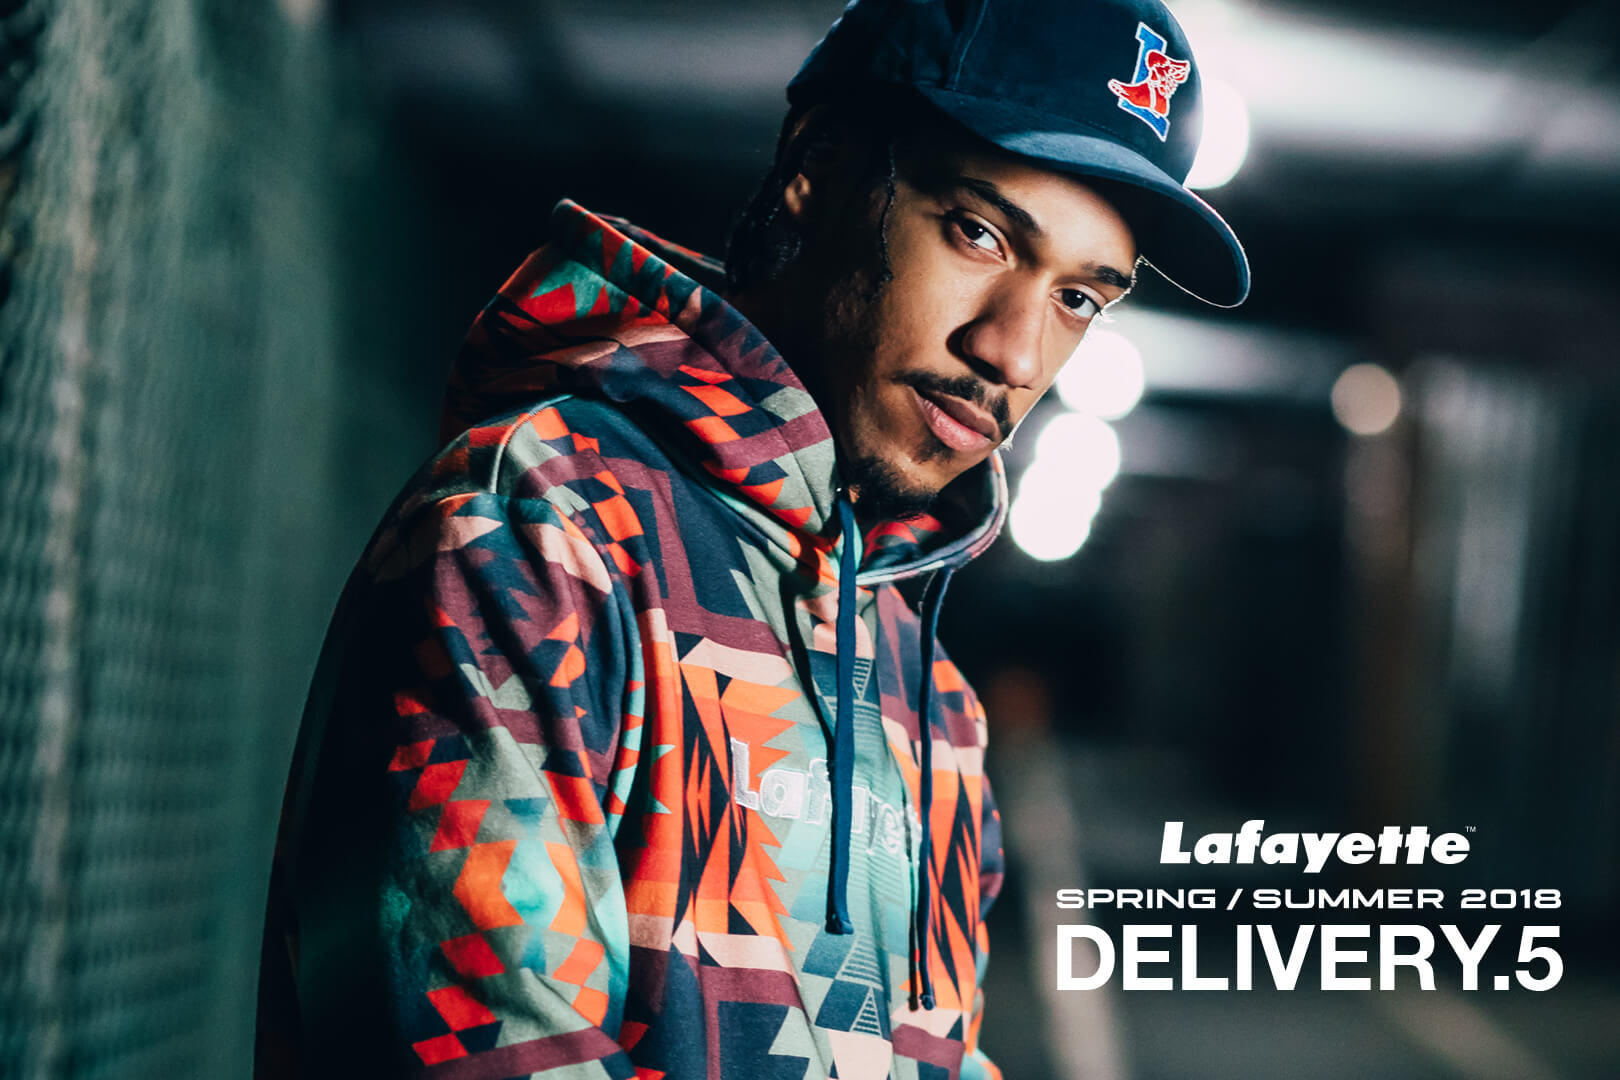 Lafayette 2018 SPRING/SUMMER COLLECTION DELIVERY.5